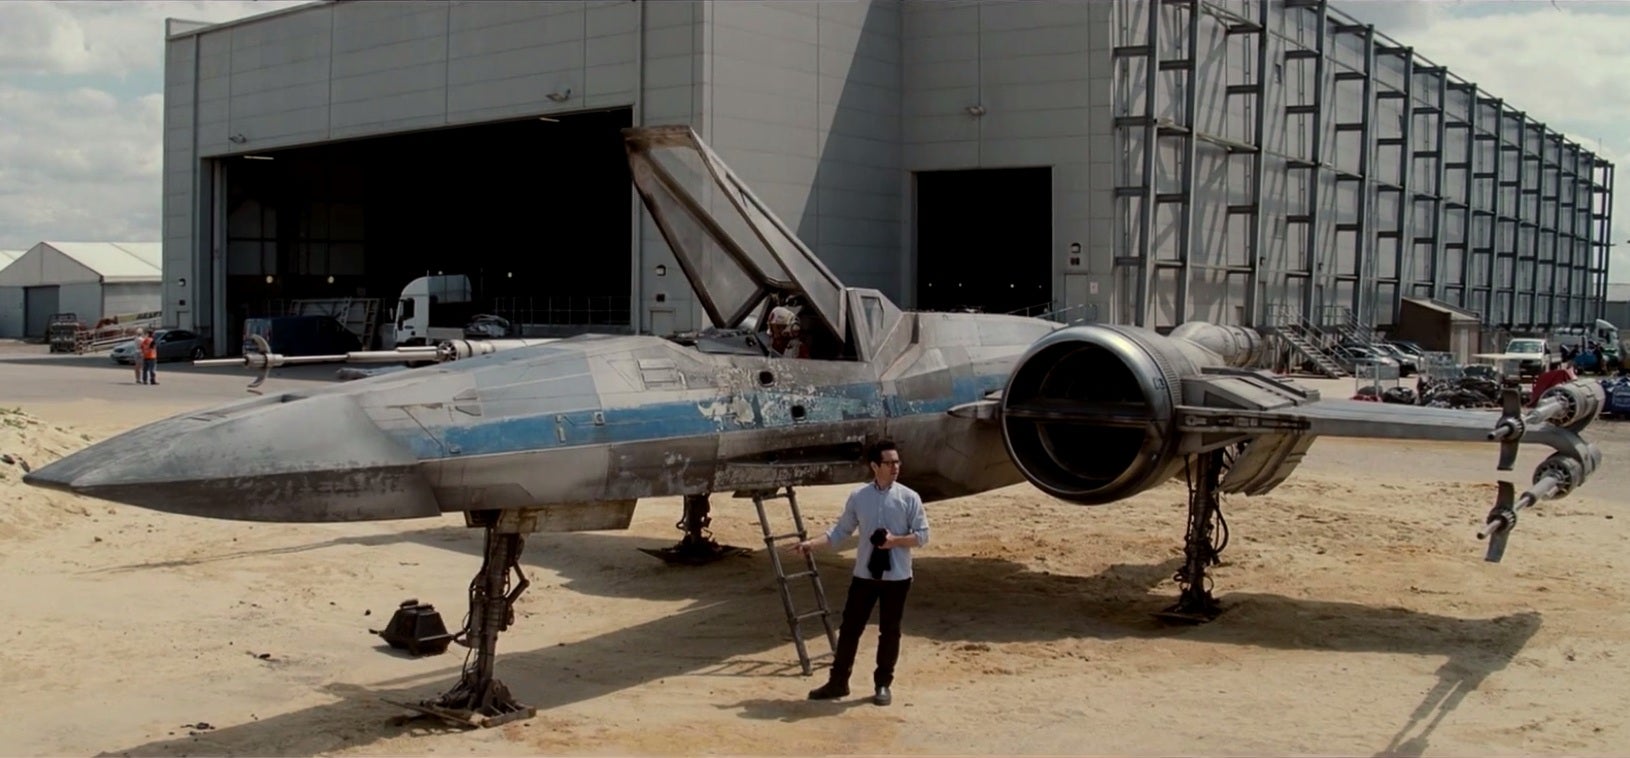 Star Wars VII director JJ Abrams with the new X-Wing spacecraft